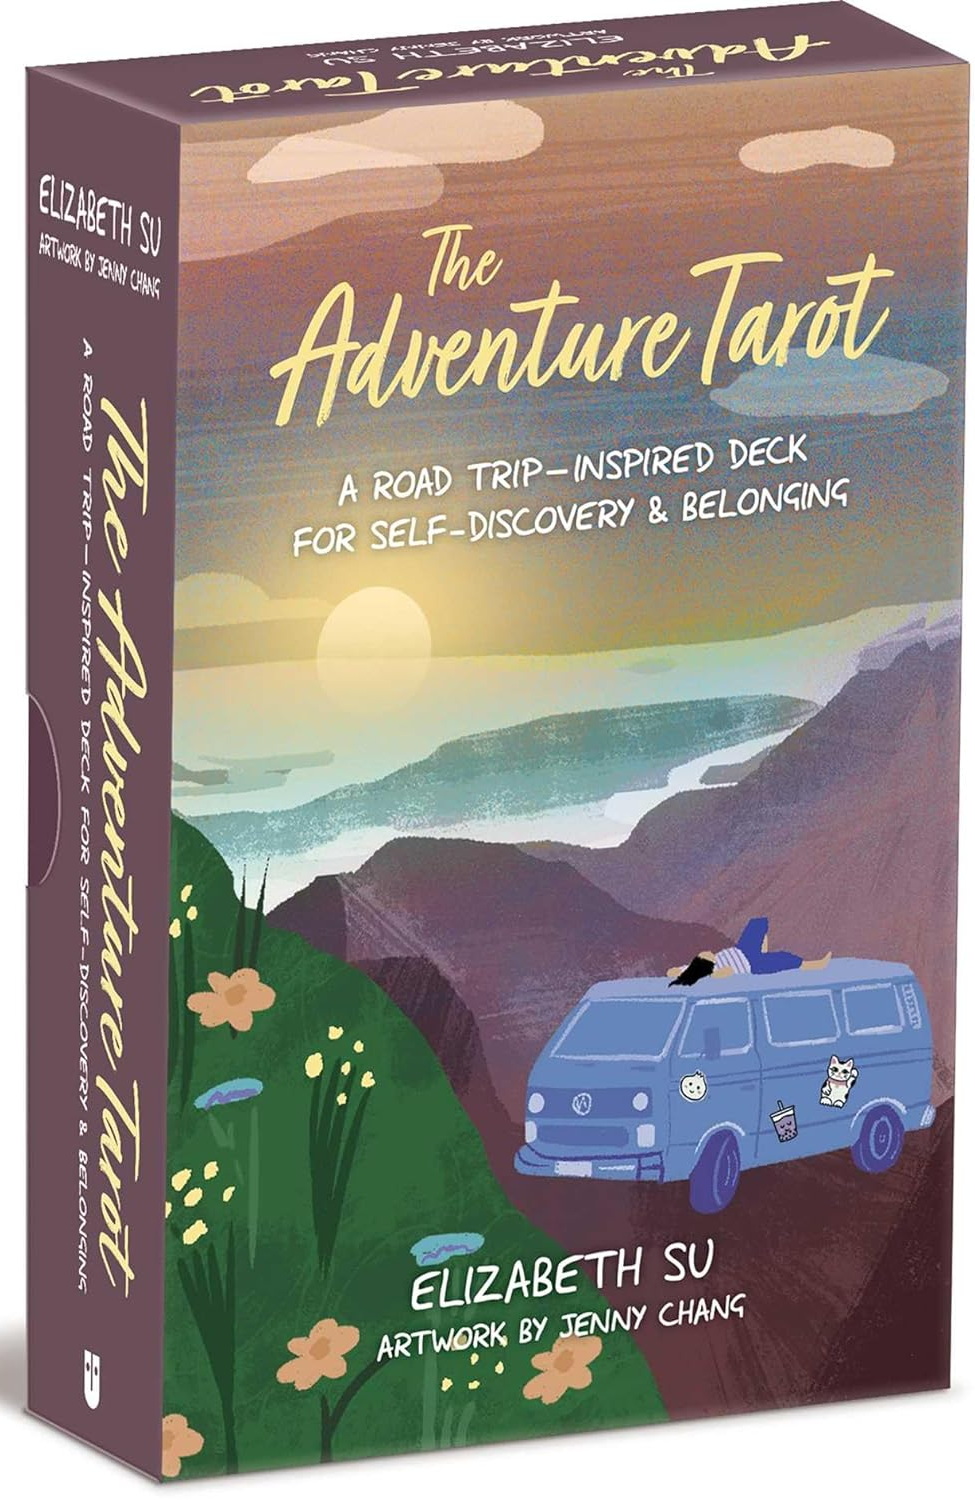 The Adventure Tarot: A Road Trip―Inspired Deck for Self-Discovery & Belonging